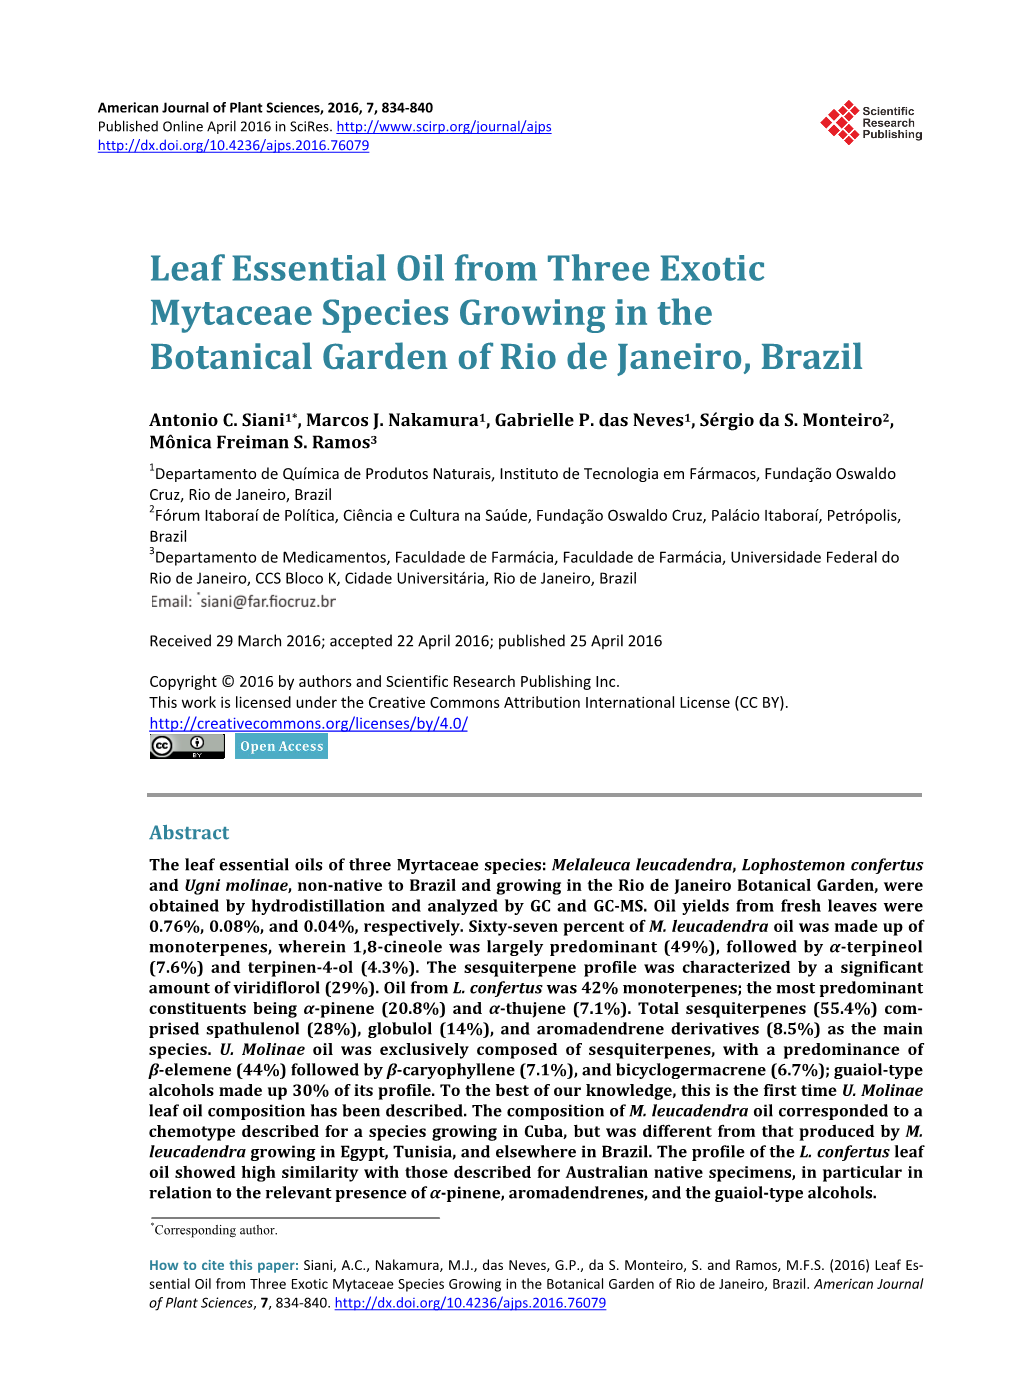 Leaf Essential Oil from Three Exotic Mytaceae Species Growing in the Botanical Garden of Rio De Janeiro, Brazil